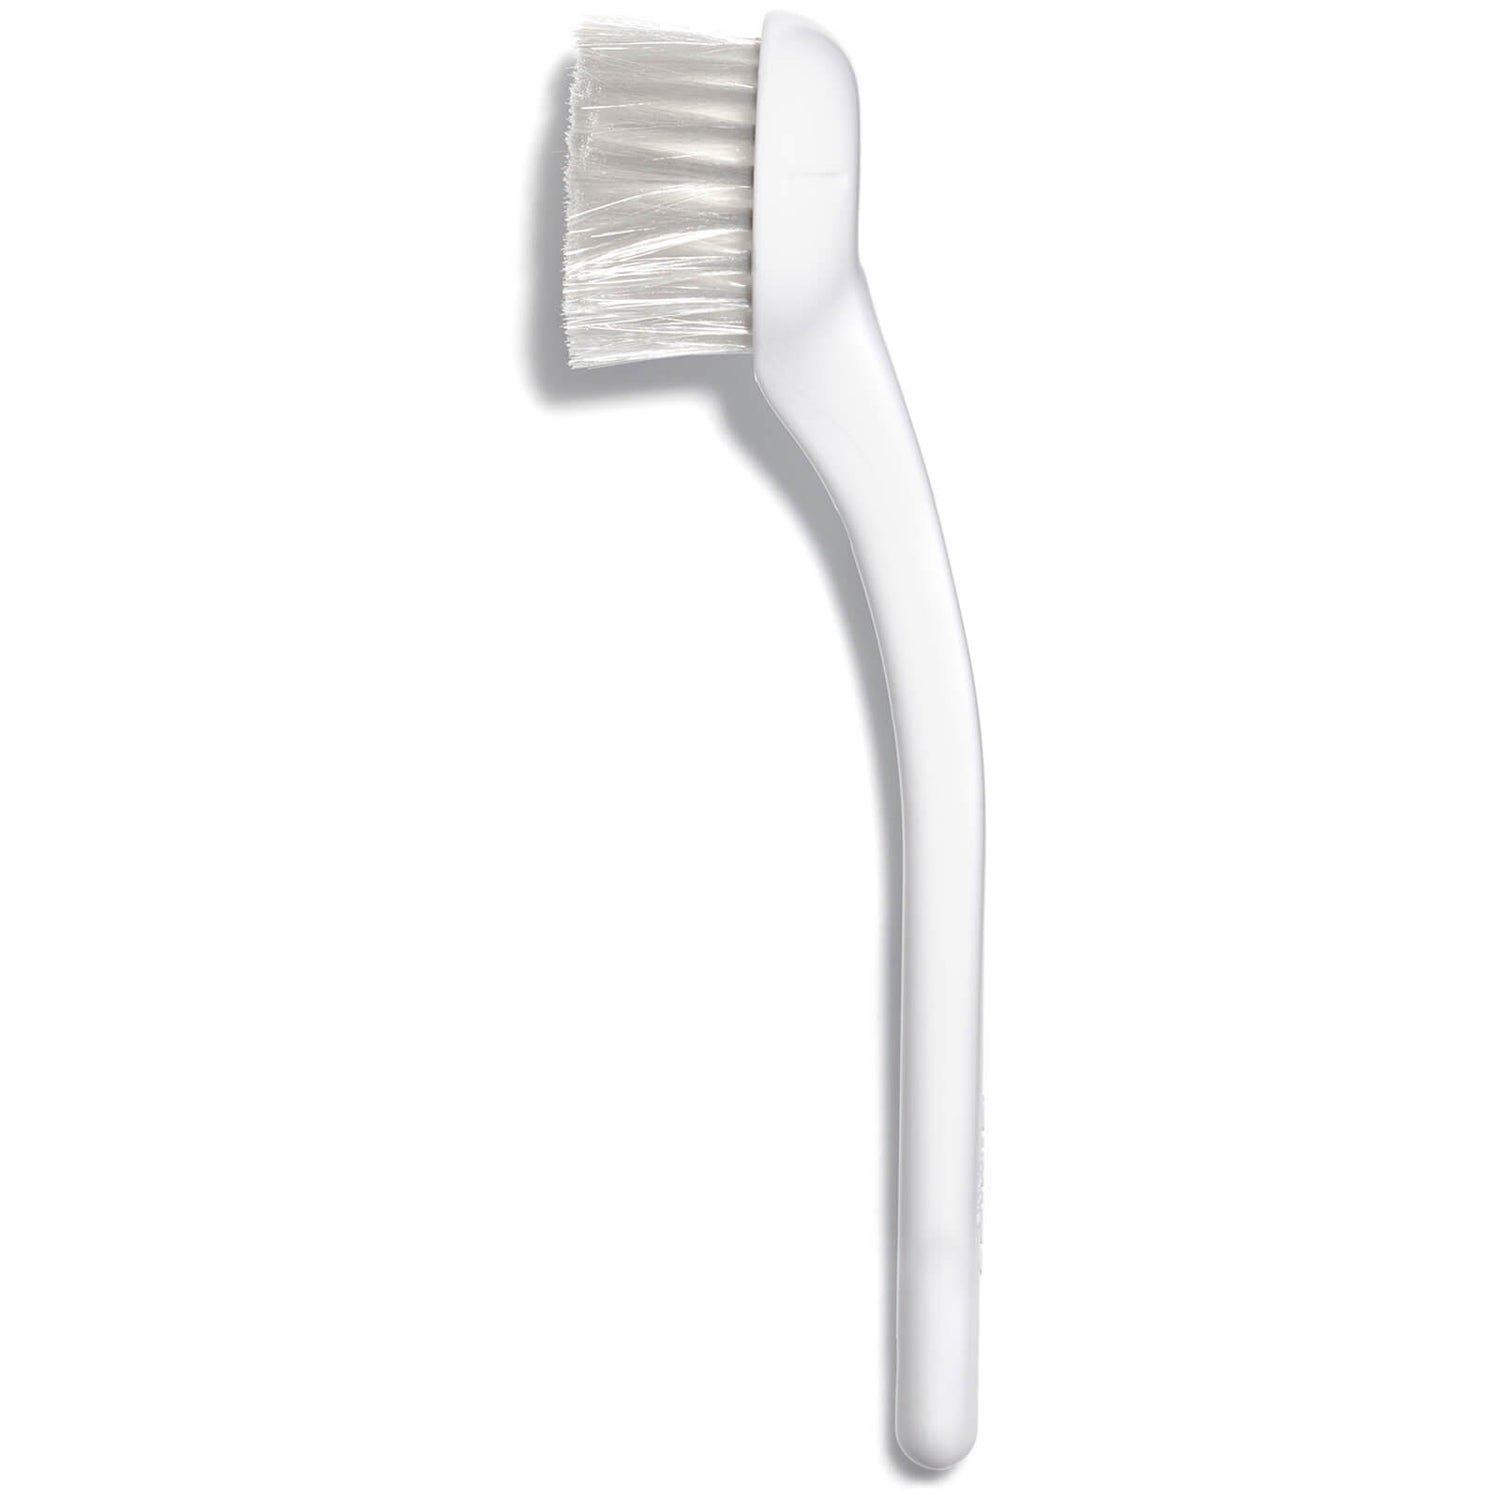 SISLEY-PARIS Gentle Brush for Face and Neck